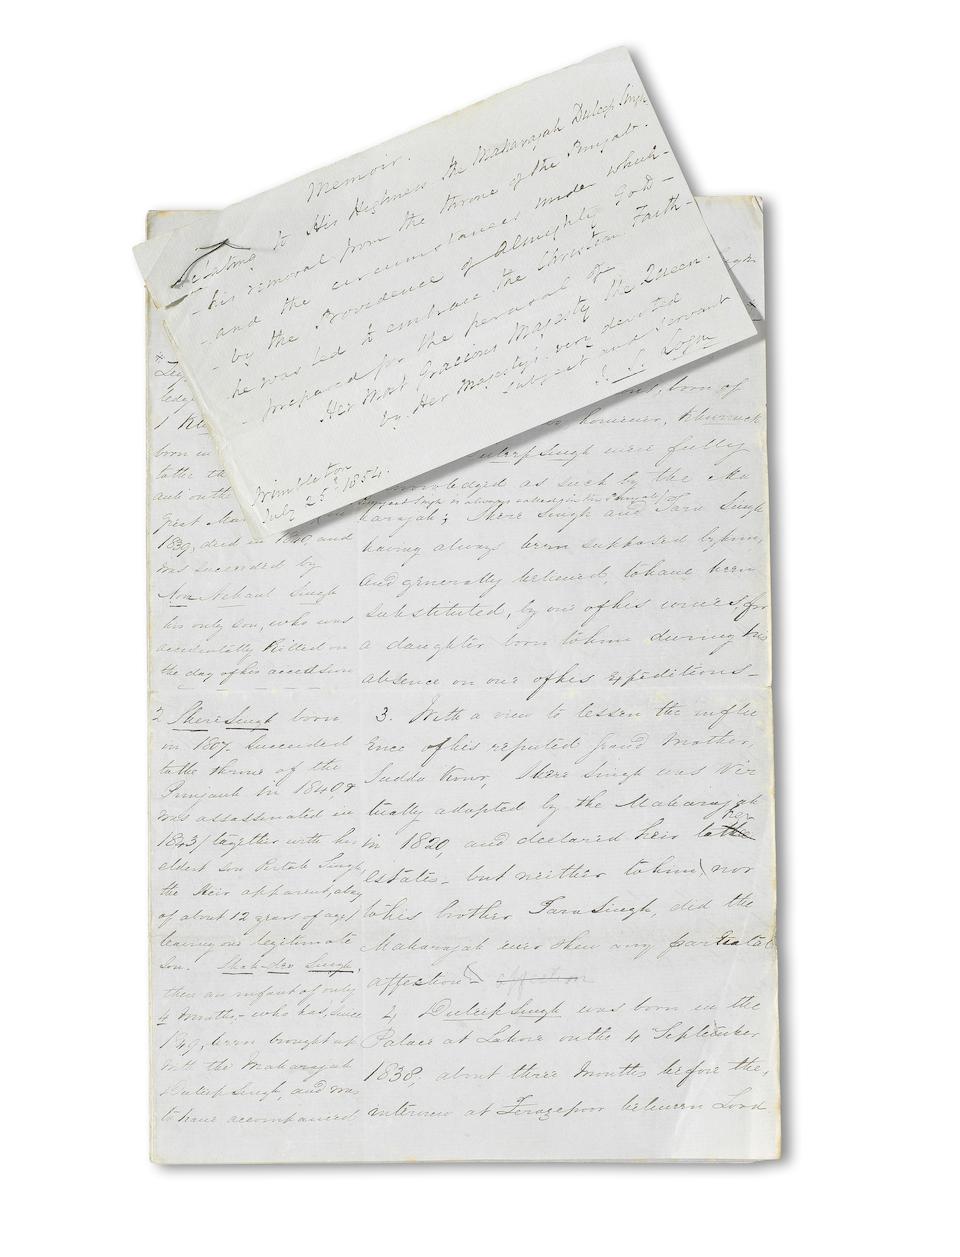 A collection of seven documents relating to Maharajah Duleep Singh, written by his guardian, Dr John Login, as a record of events, of the details of the treaties with the Sikh nation, the financial settlements of the Maharajah's affairs, and his conversion to Christianity England, the earliest dated July 1854, the latest shortly after January 1860(7)